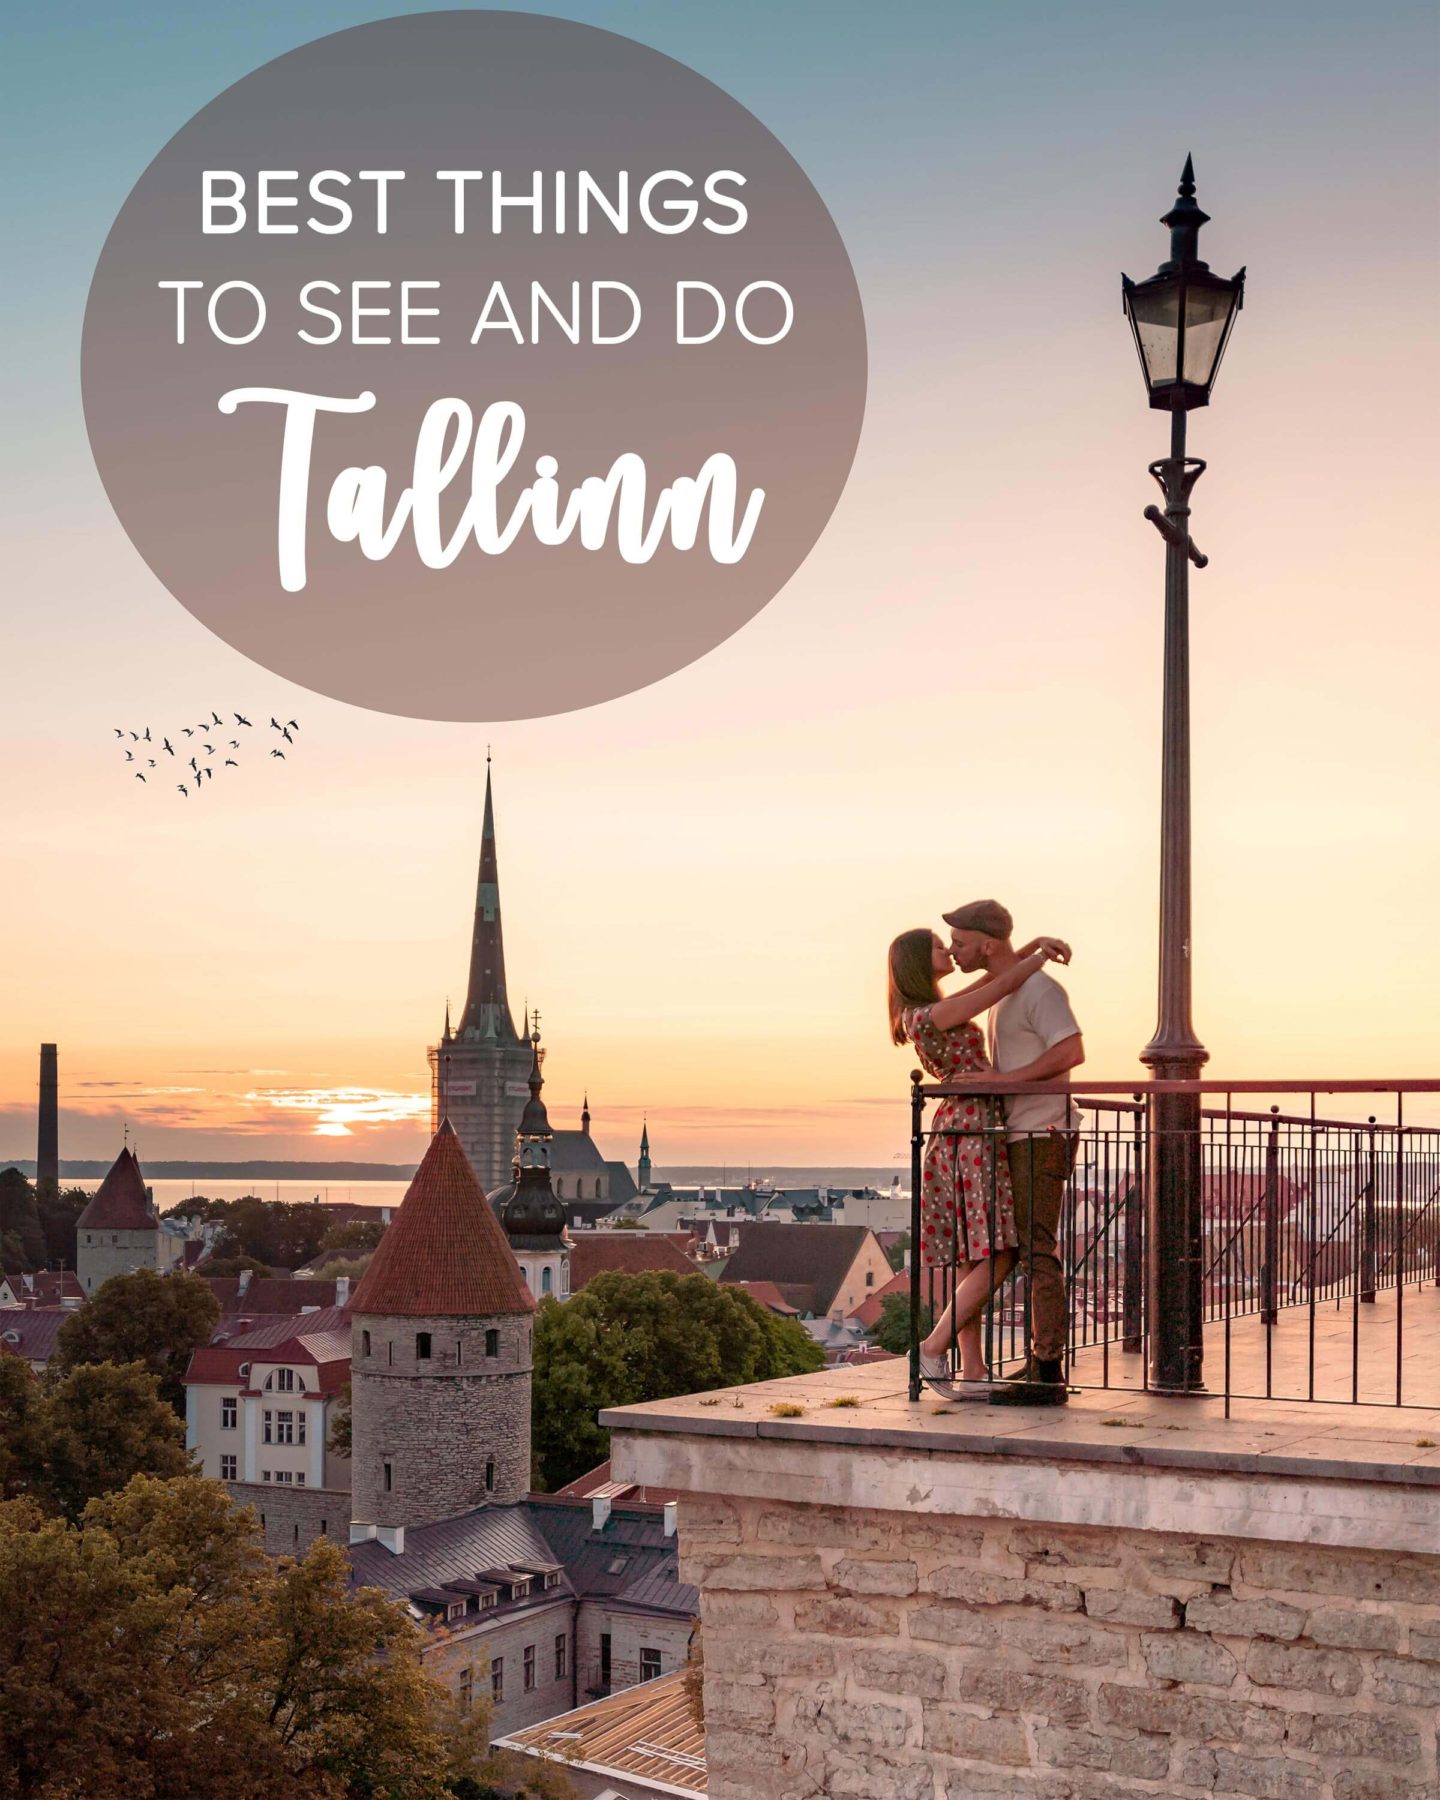 best things to see and do in tallinn